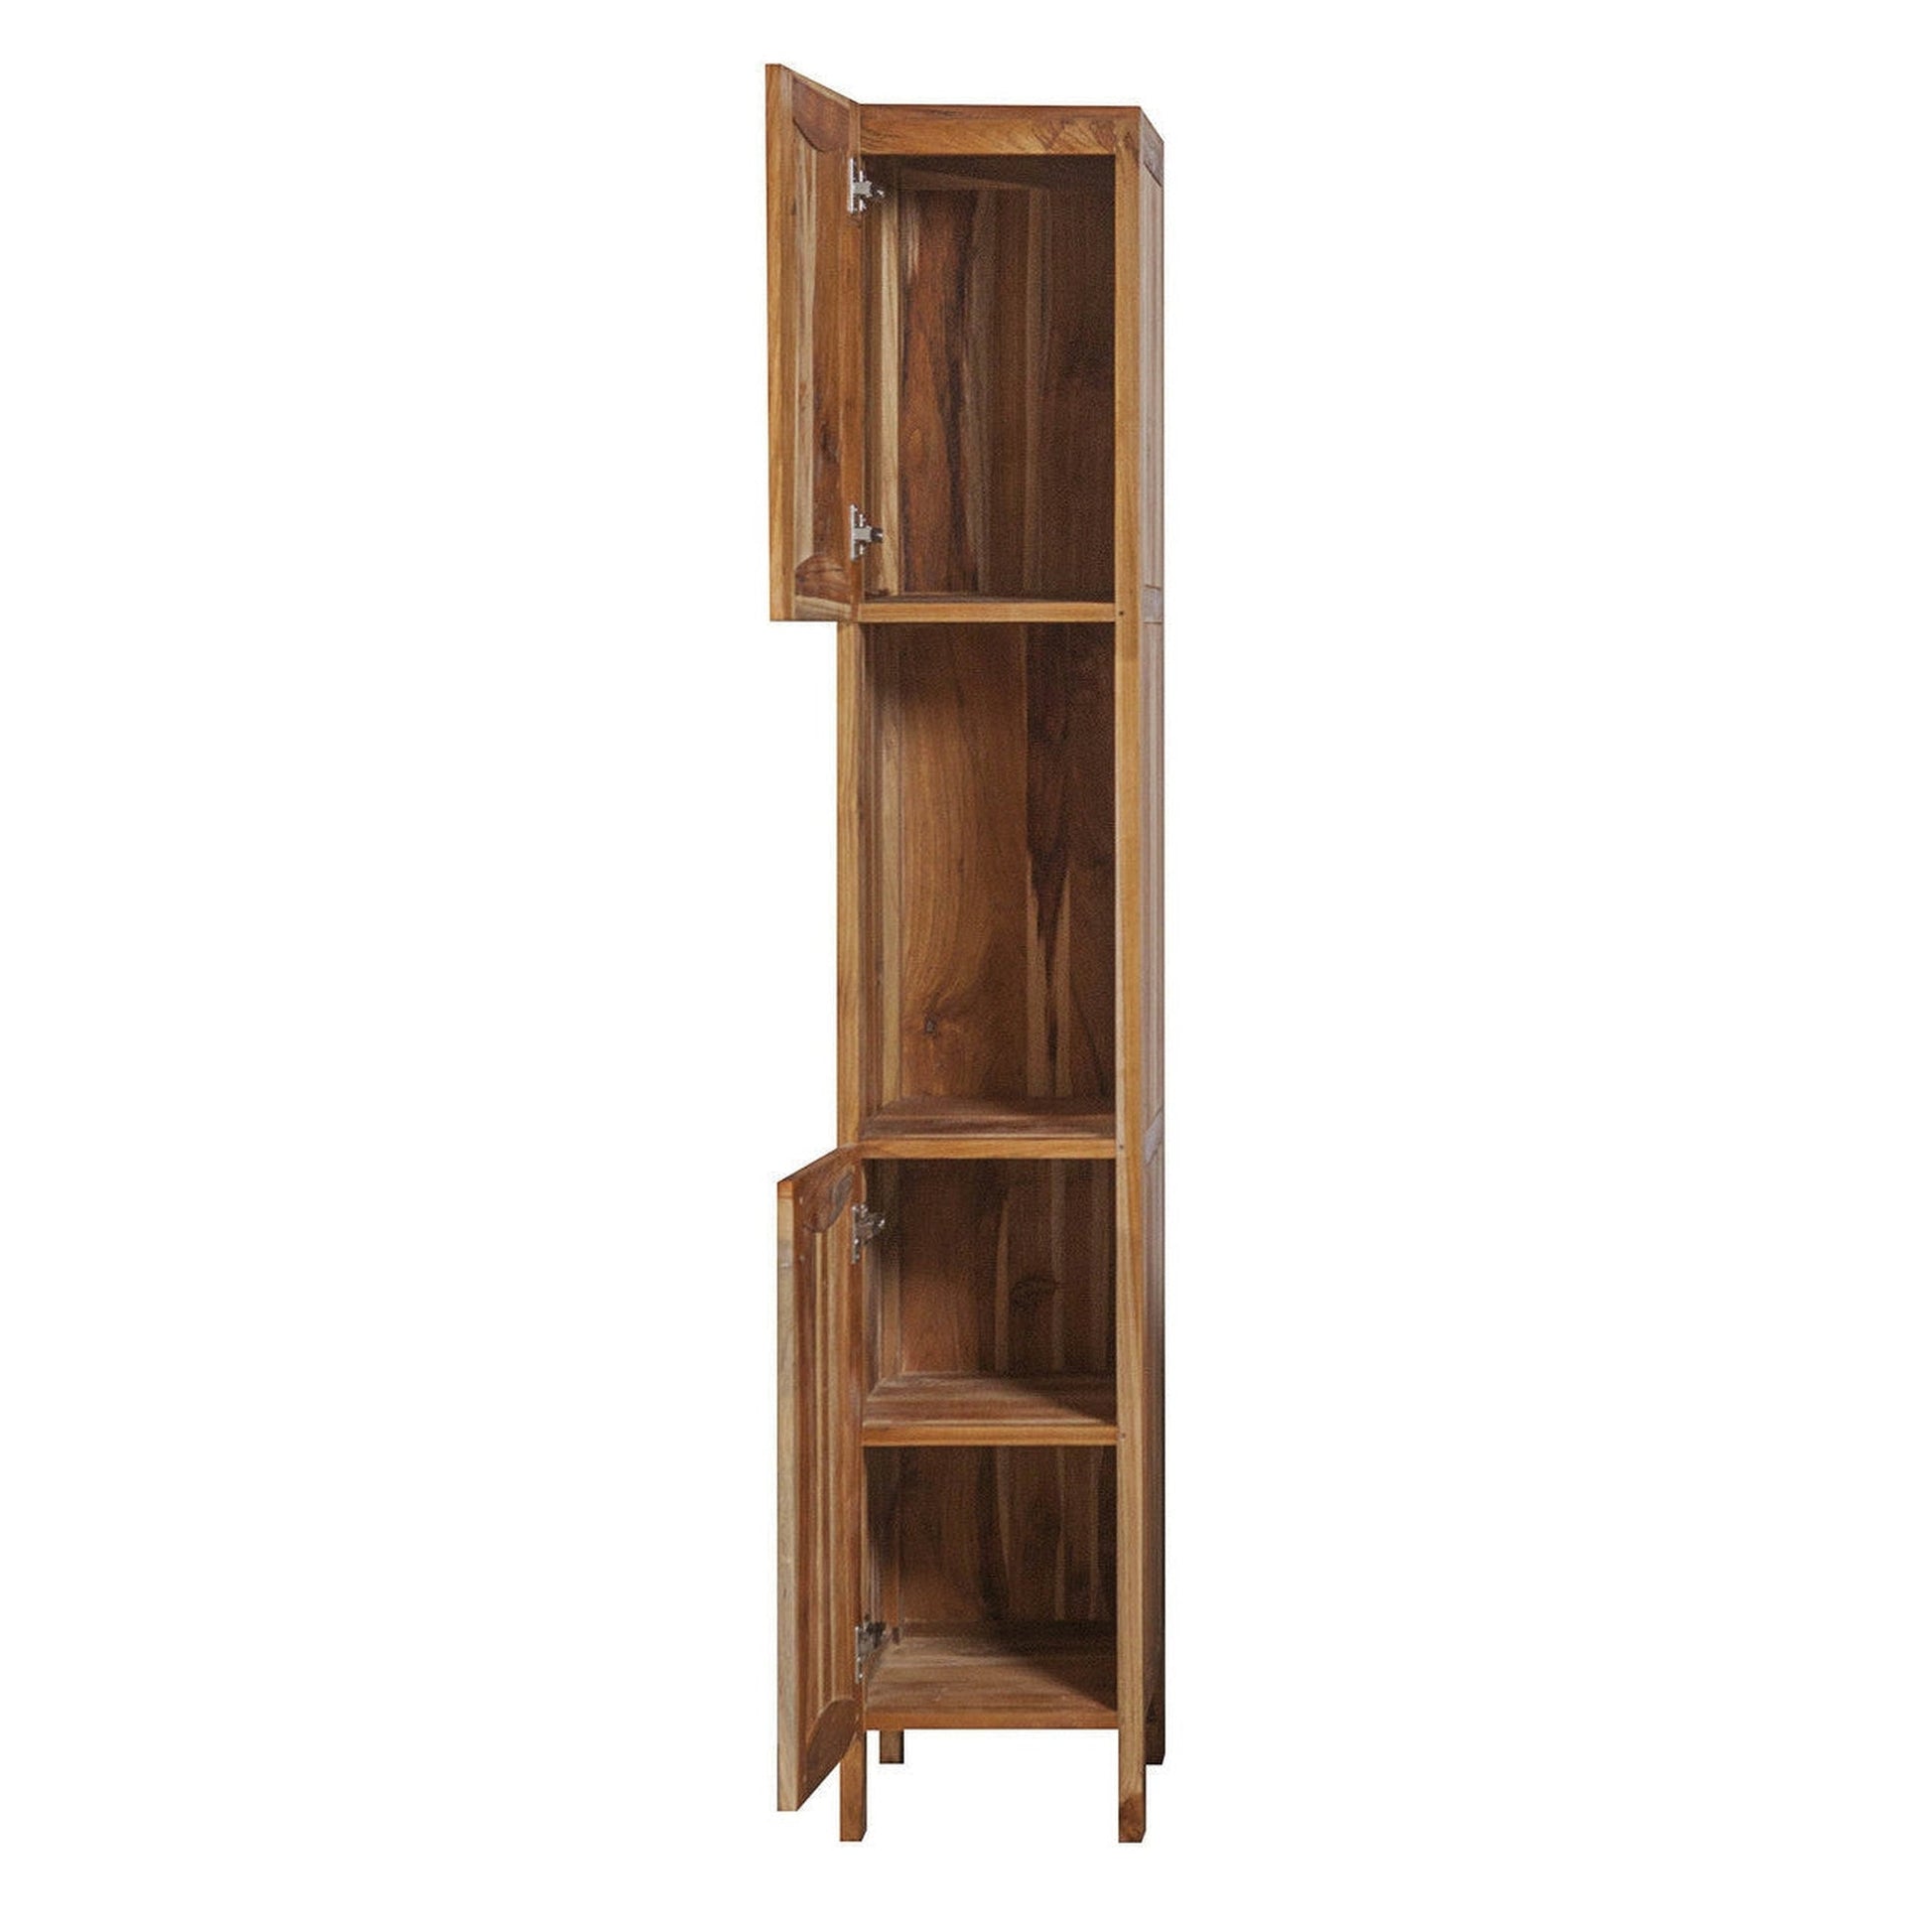 EcoDecors Curvature 79" EarthyTeak Solid Teak Wood Fully Assembled Freestanding Linen Tower